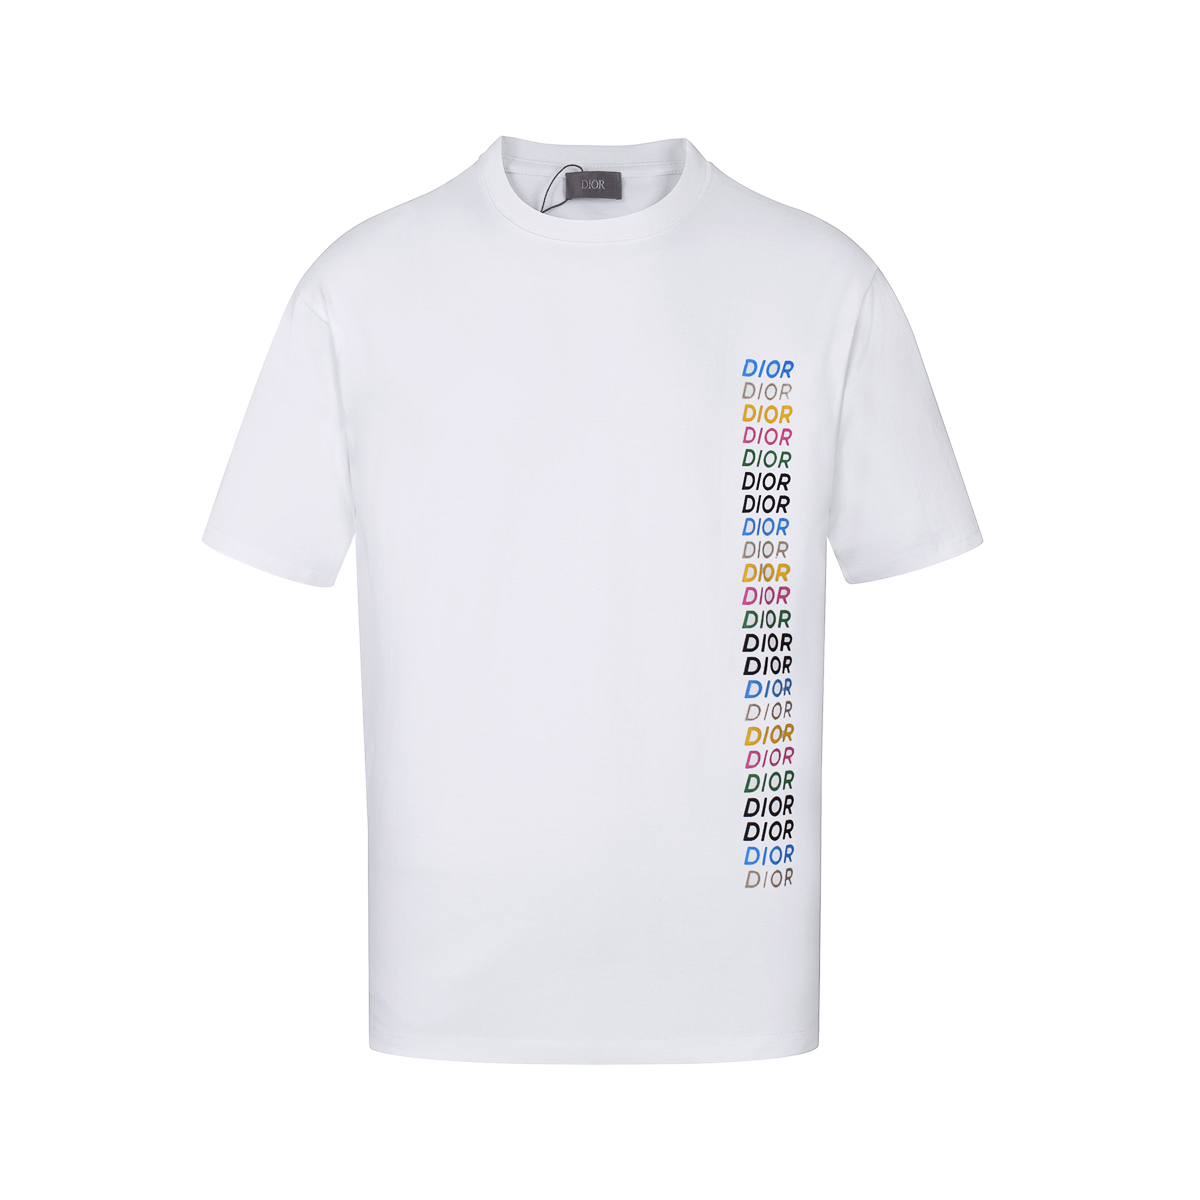 Dior Clothing T-Shirt Black White Unisex Spring Collection Short Sleeve